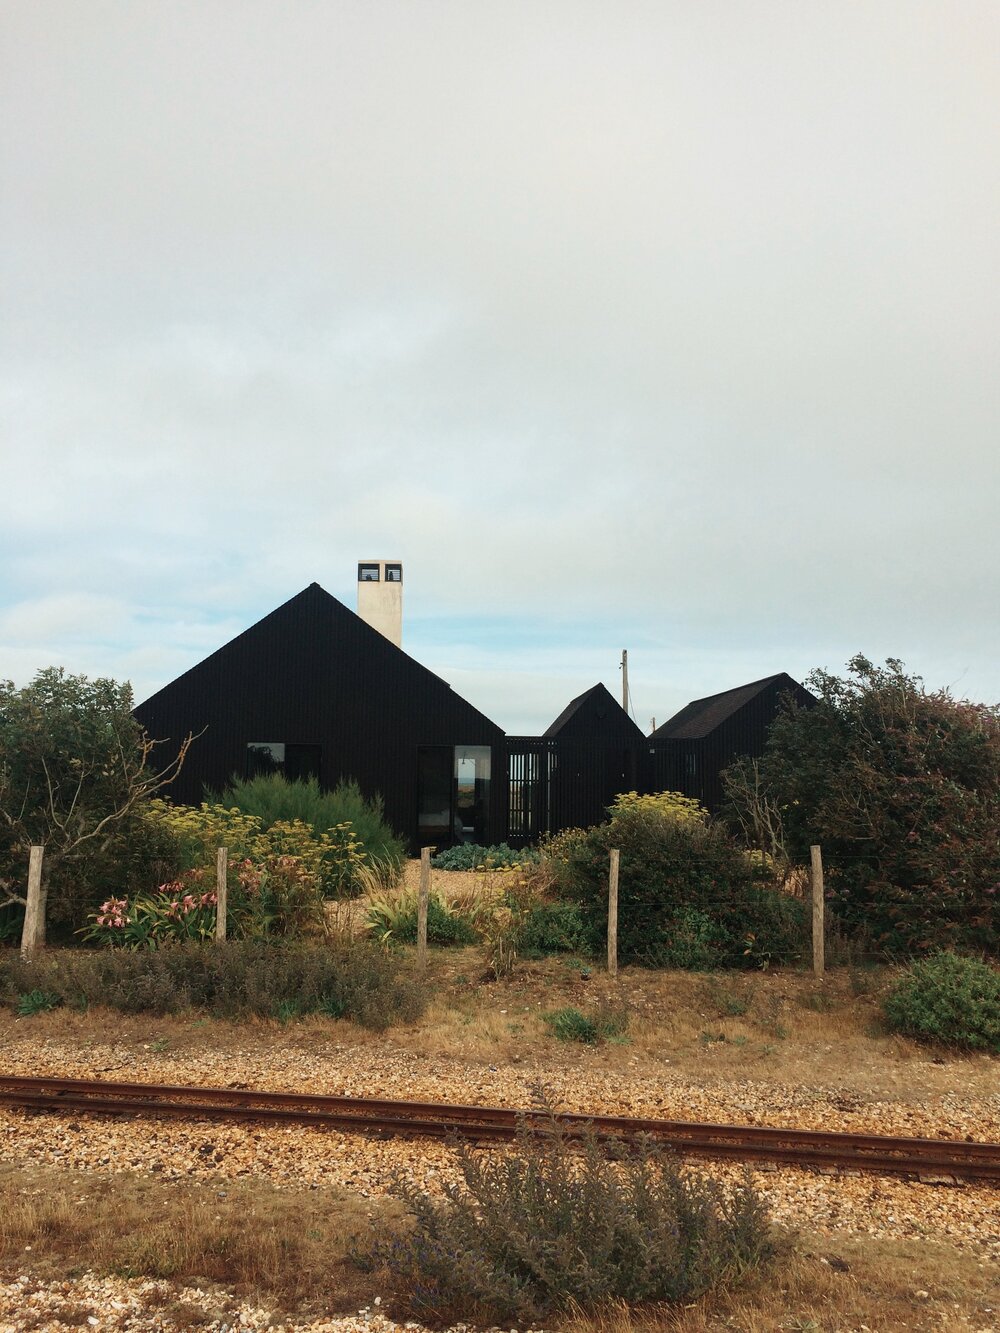 The Shingle House - Dungeness